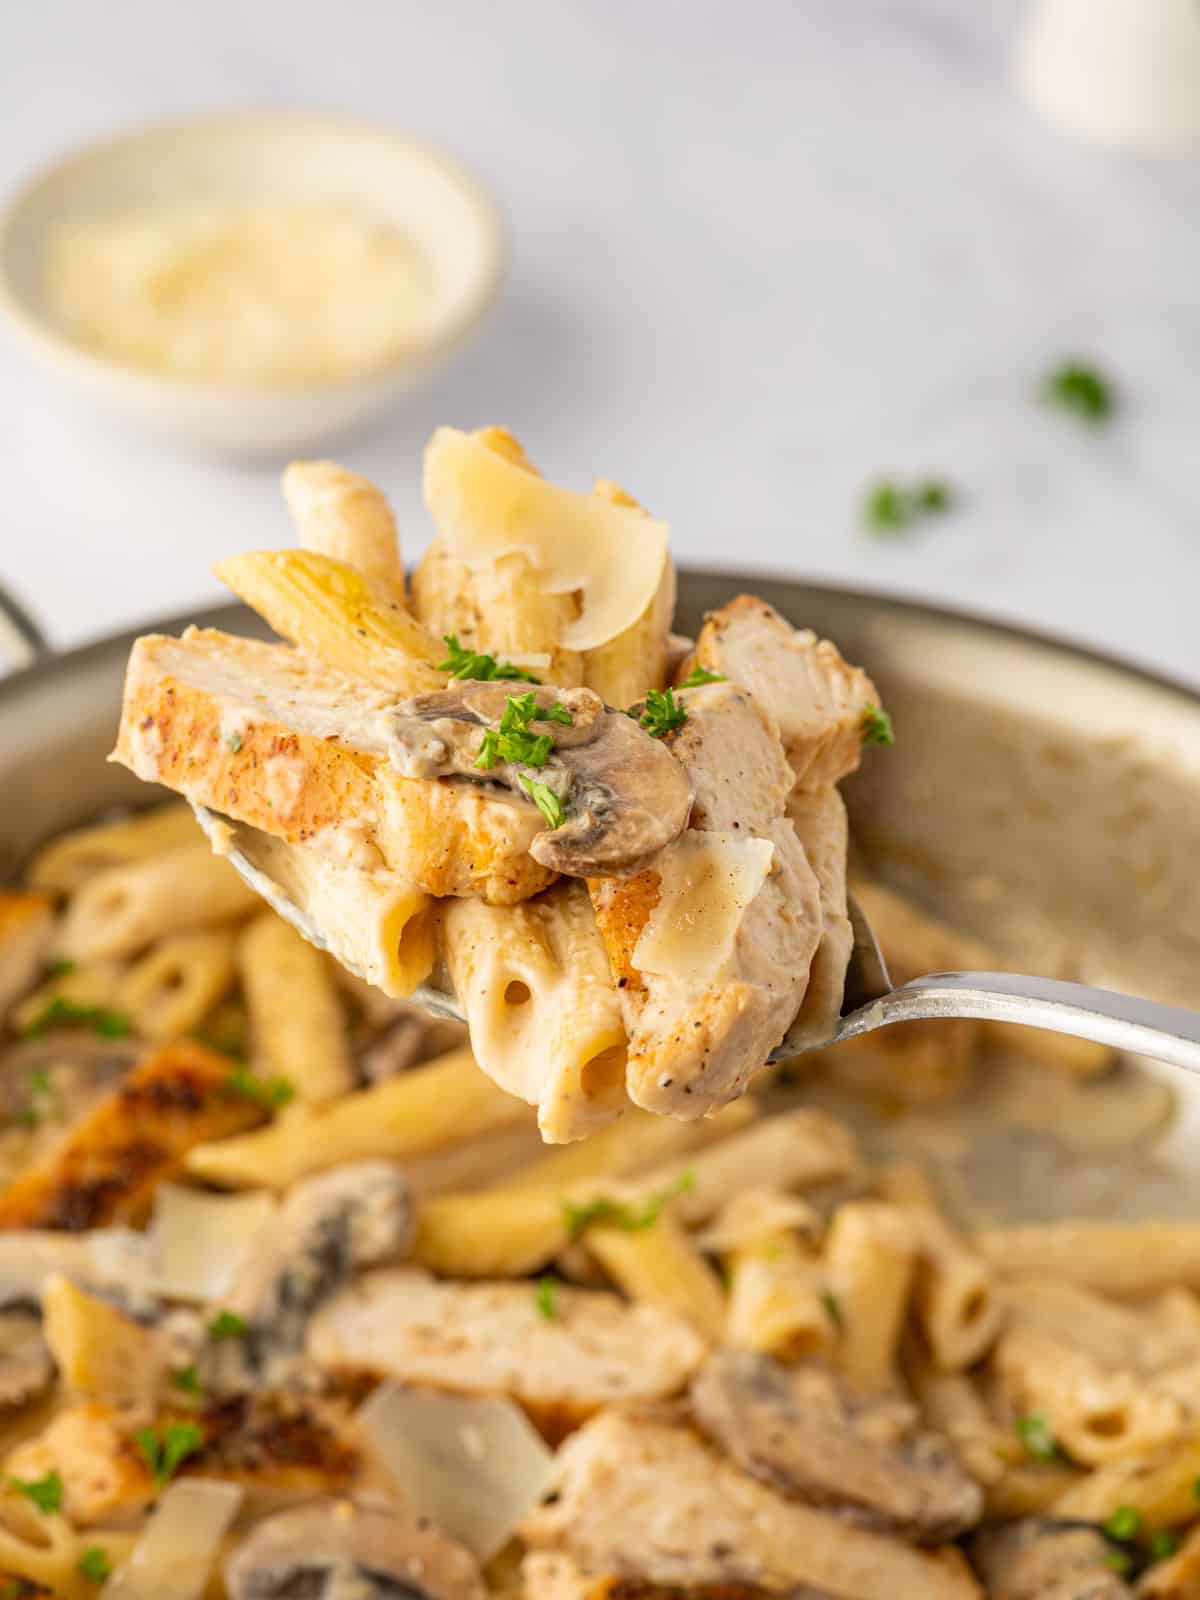 A spoon lifts a bite of creamy chicken and mushroom pasta.